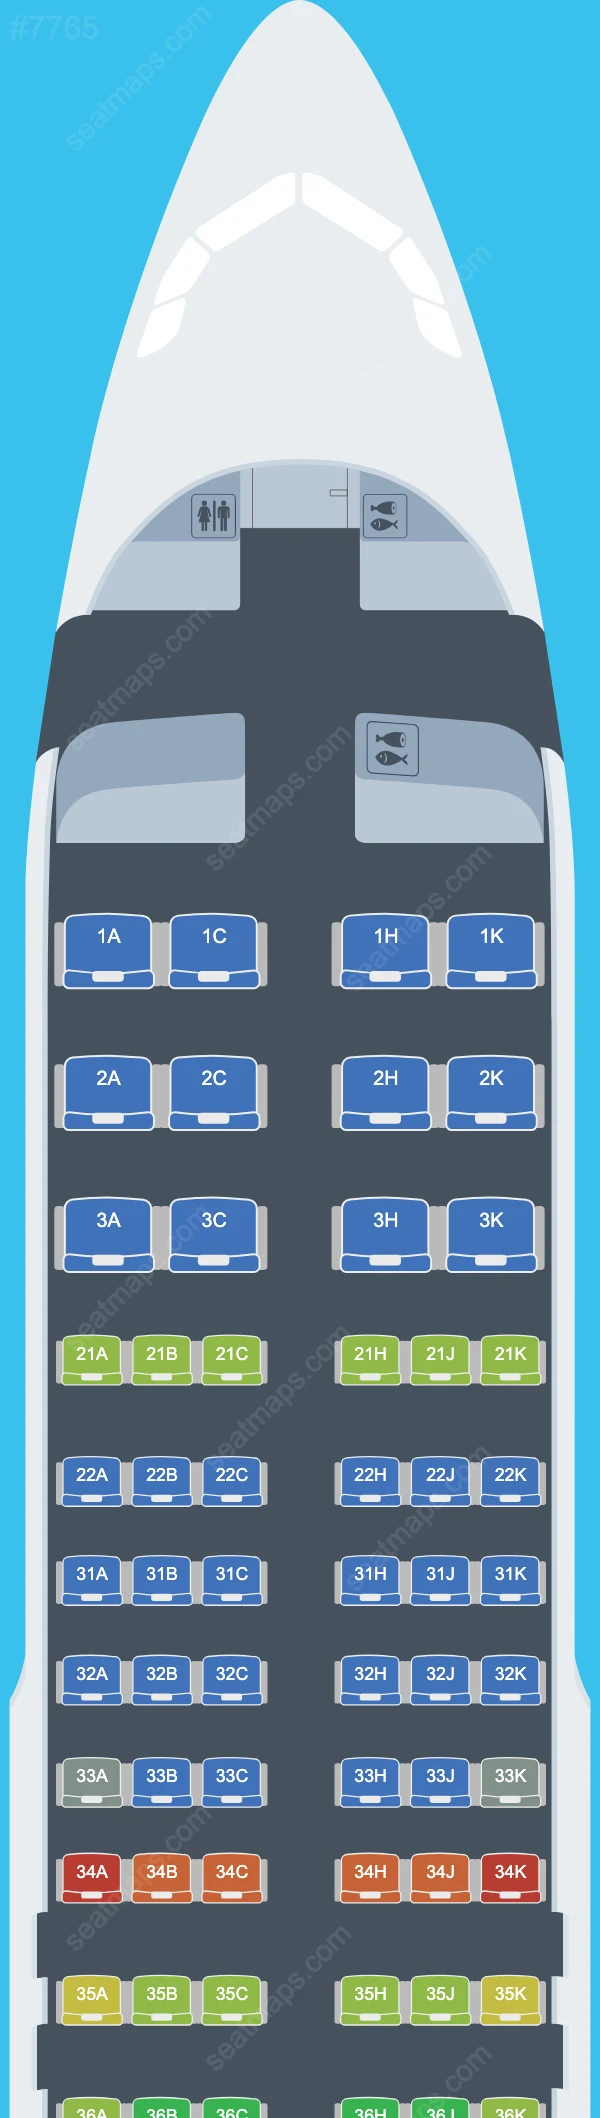 Philippine Airlines (PAL) Airbus A320 Seat Maps A320-200 V.2